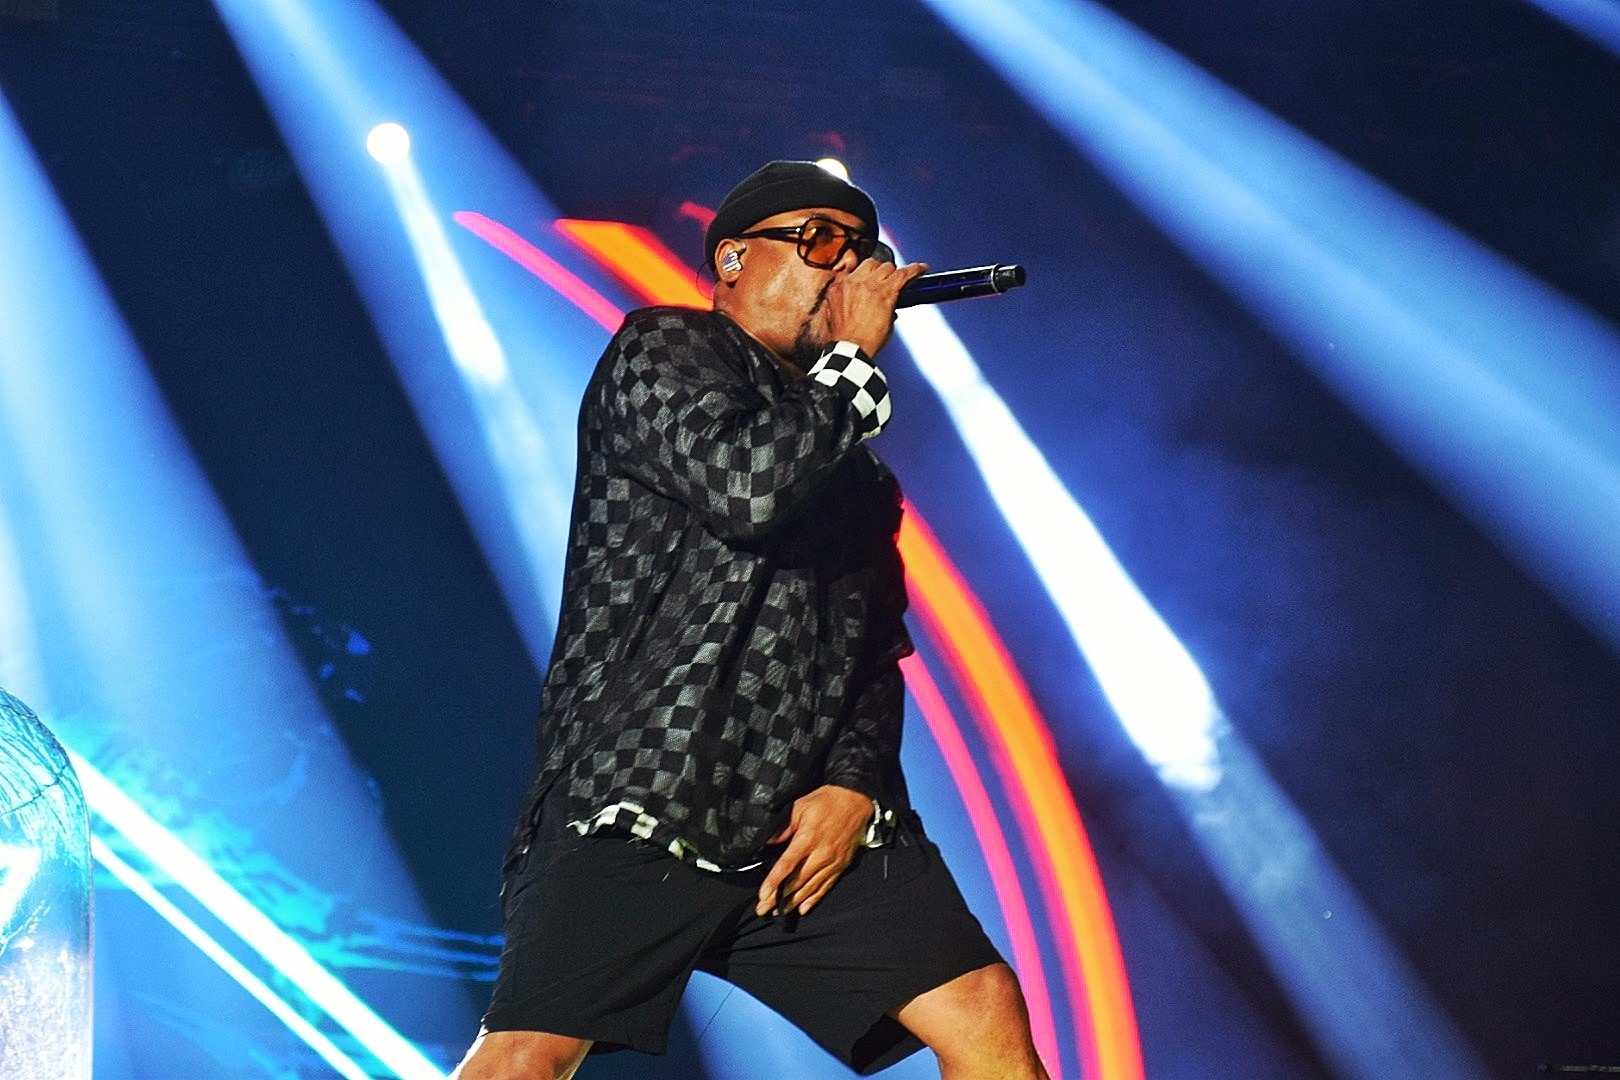 Black Eyed Peas at Neversea Beach in Constanta on July 9, 2022 (cba8587d98)